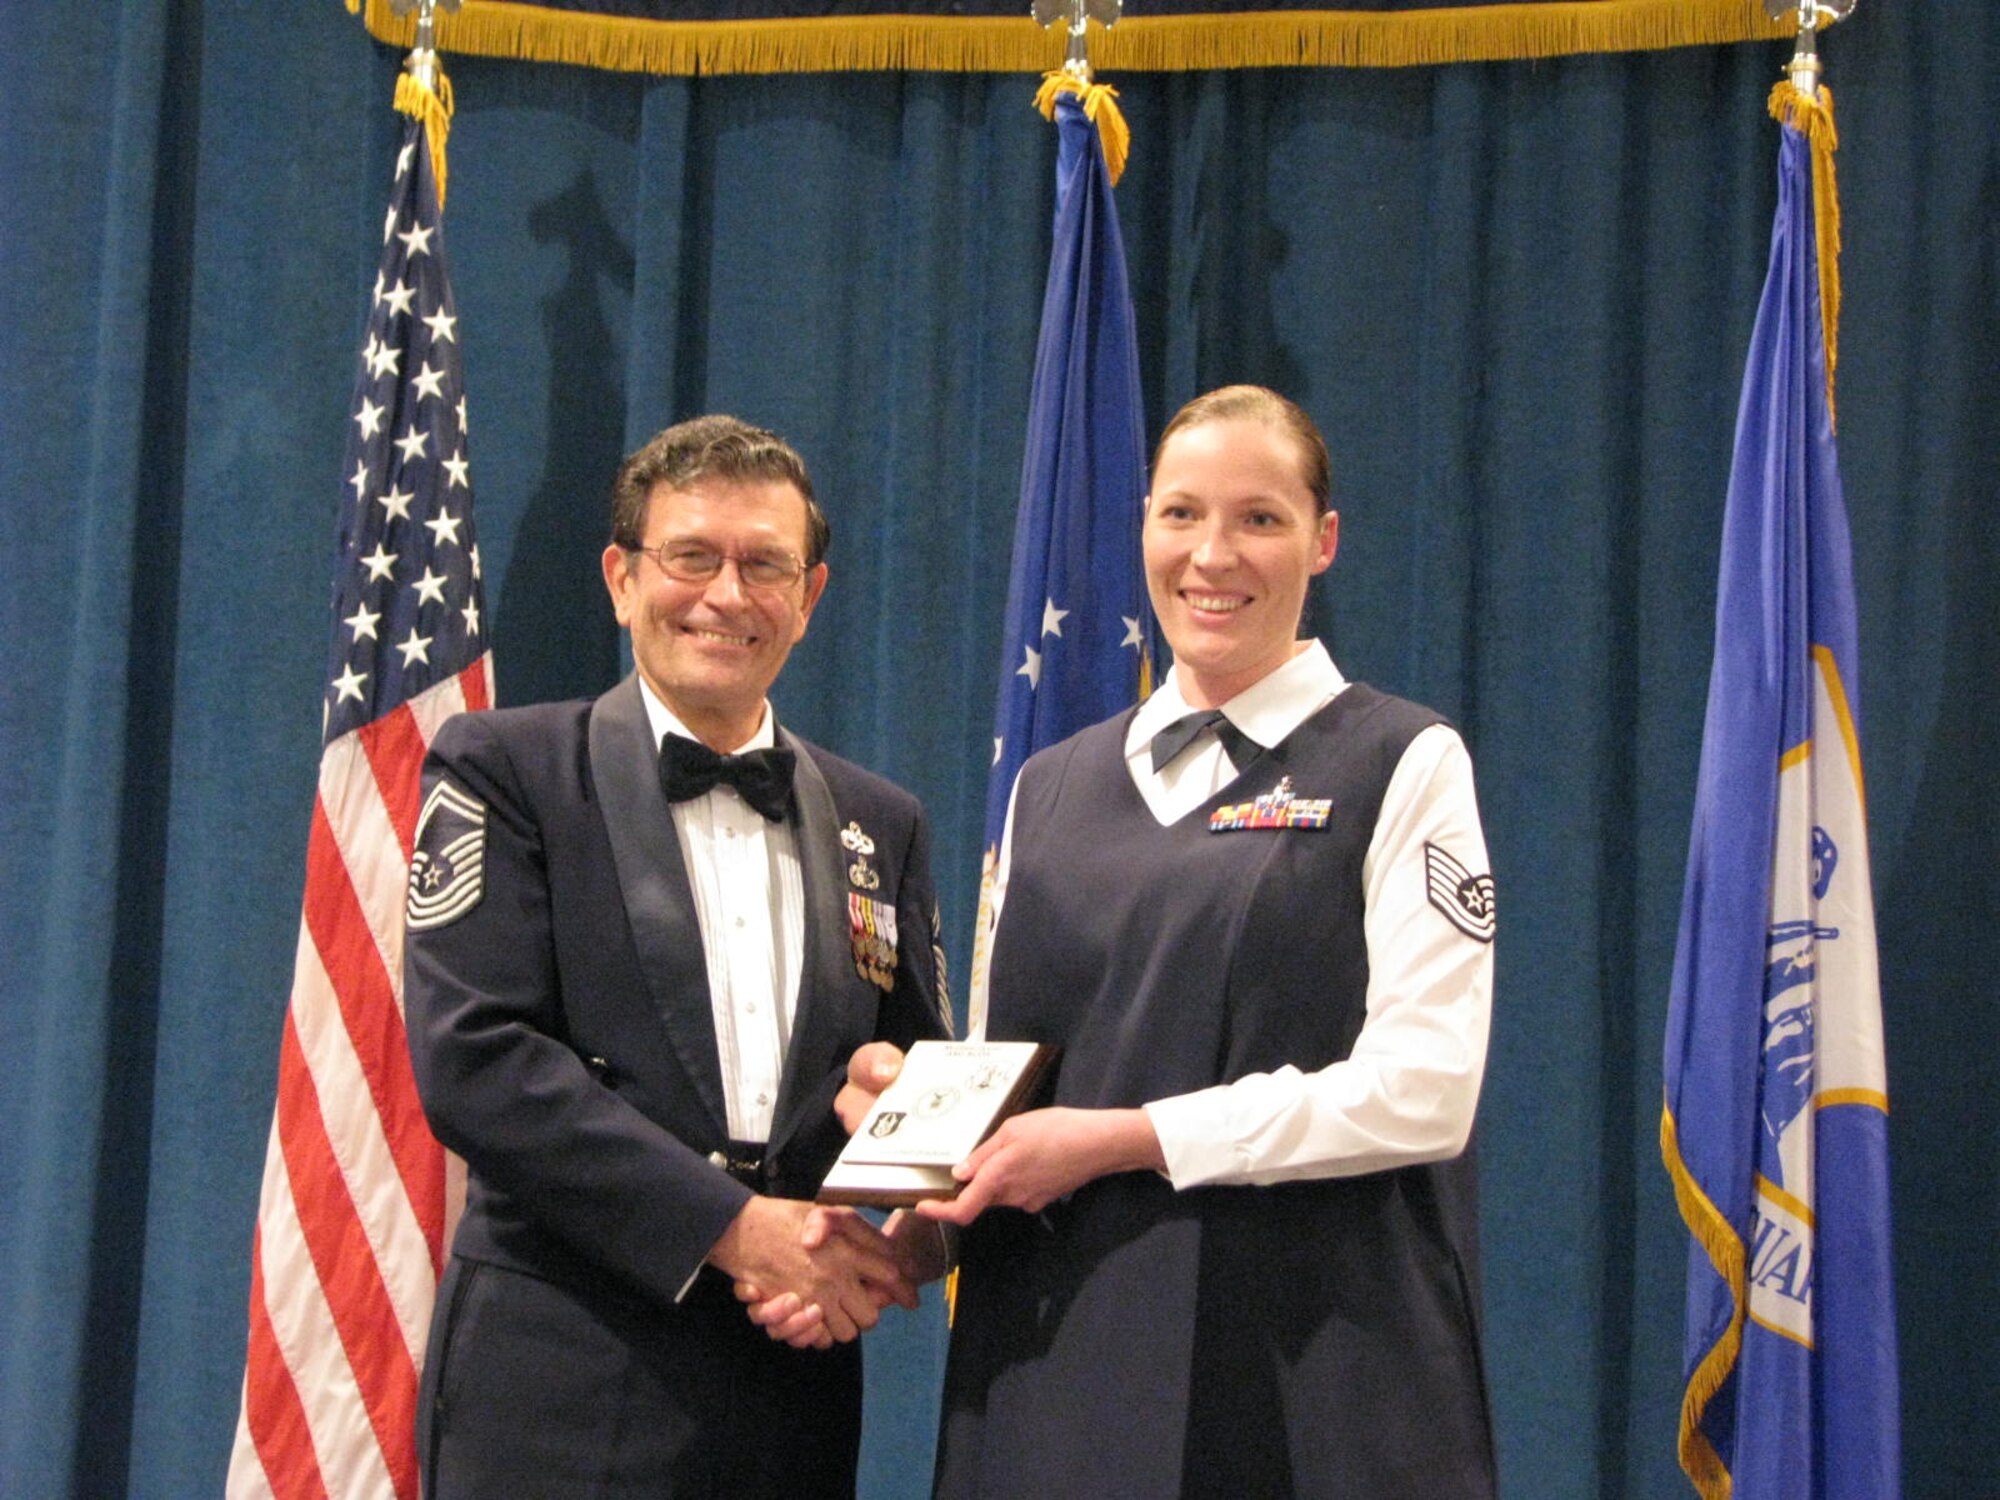 Technical Sgt Sarah Johnson receives her diploma from Chief Master Sgt (Ret) Lynn Alexander at a Non-Commissioned Officer graduation ceremony at McGhee Tyson Air National Guard Base, TN on Dec. 15.  Johnson was among 11 students from the Texas Air National Guard's 149th Fighter Wing and 273 Information Operation Squadron participating in an Air National Guard satellite NCO professional education course where students take a portion of their courses locally and then conclude with a 17-day in-residence course at McGhee Tyson.  